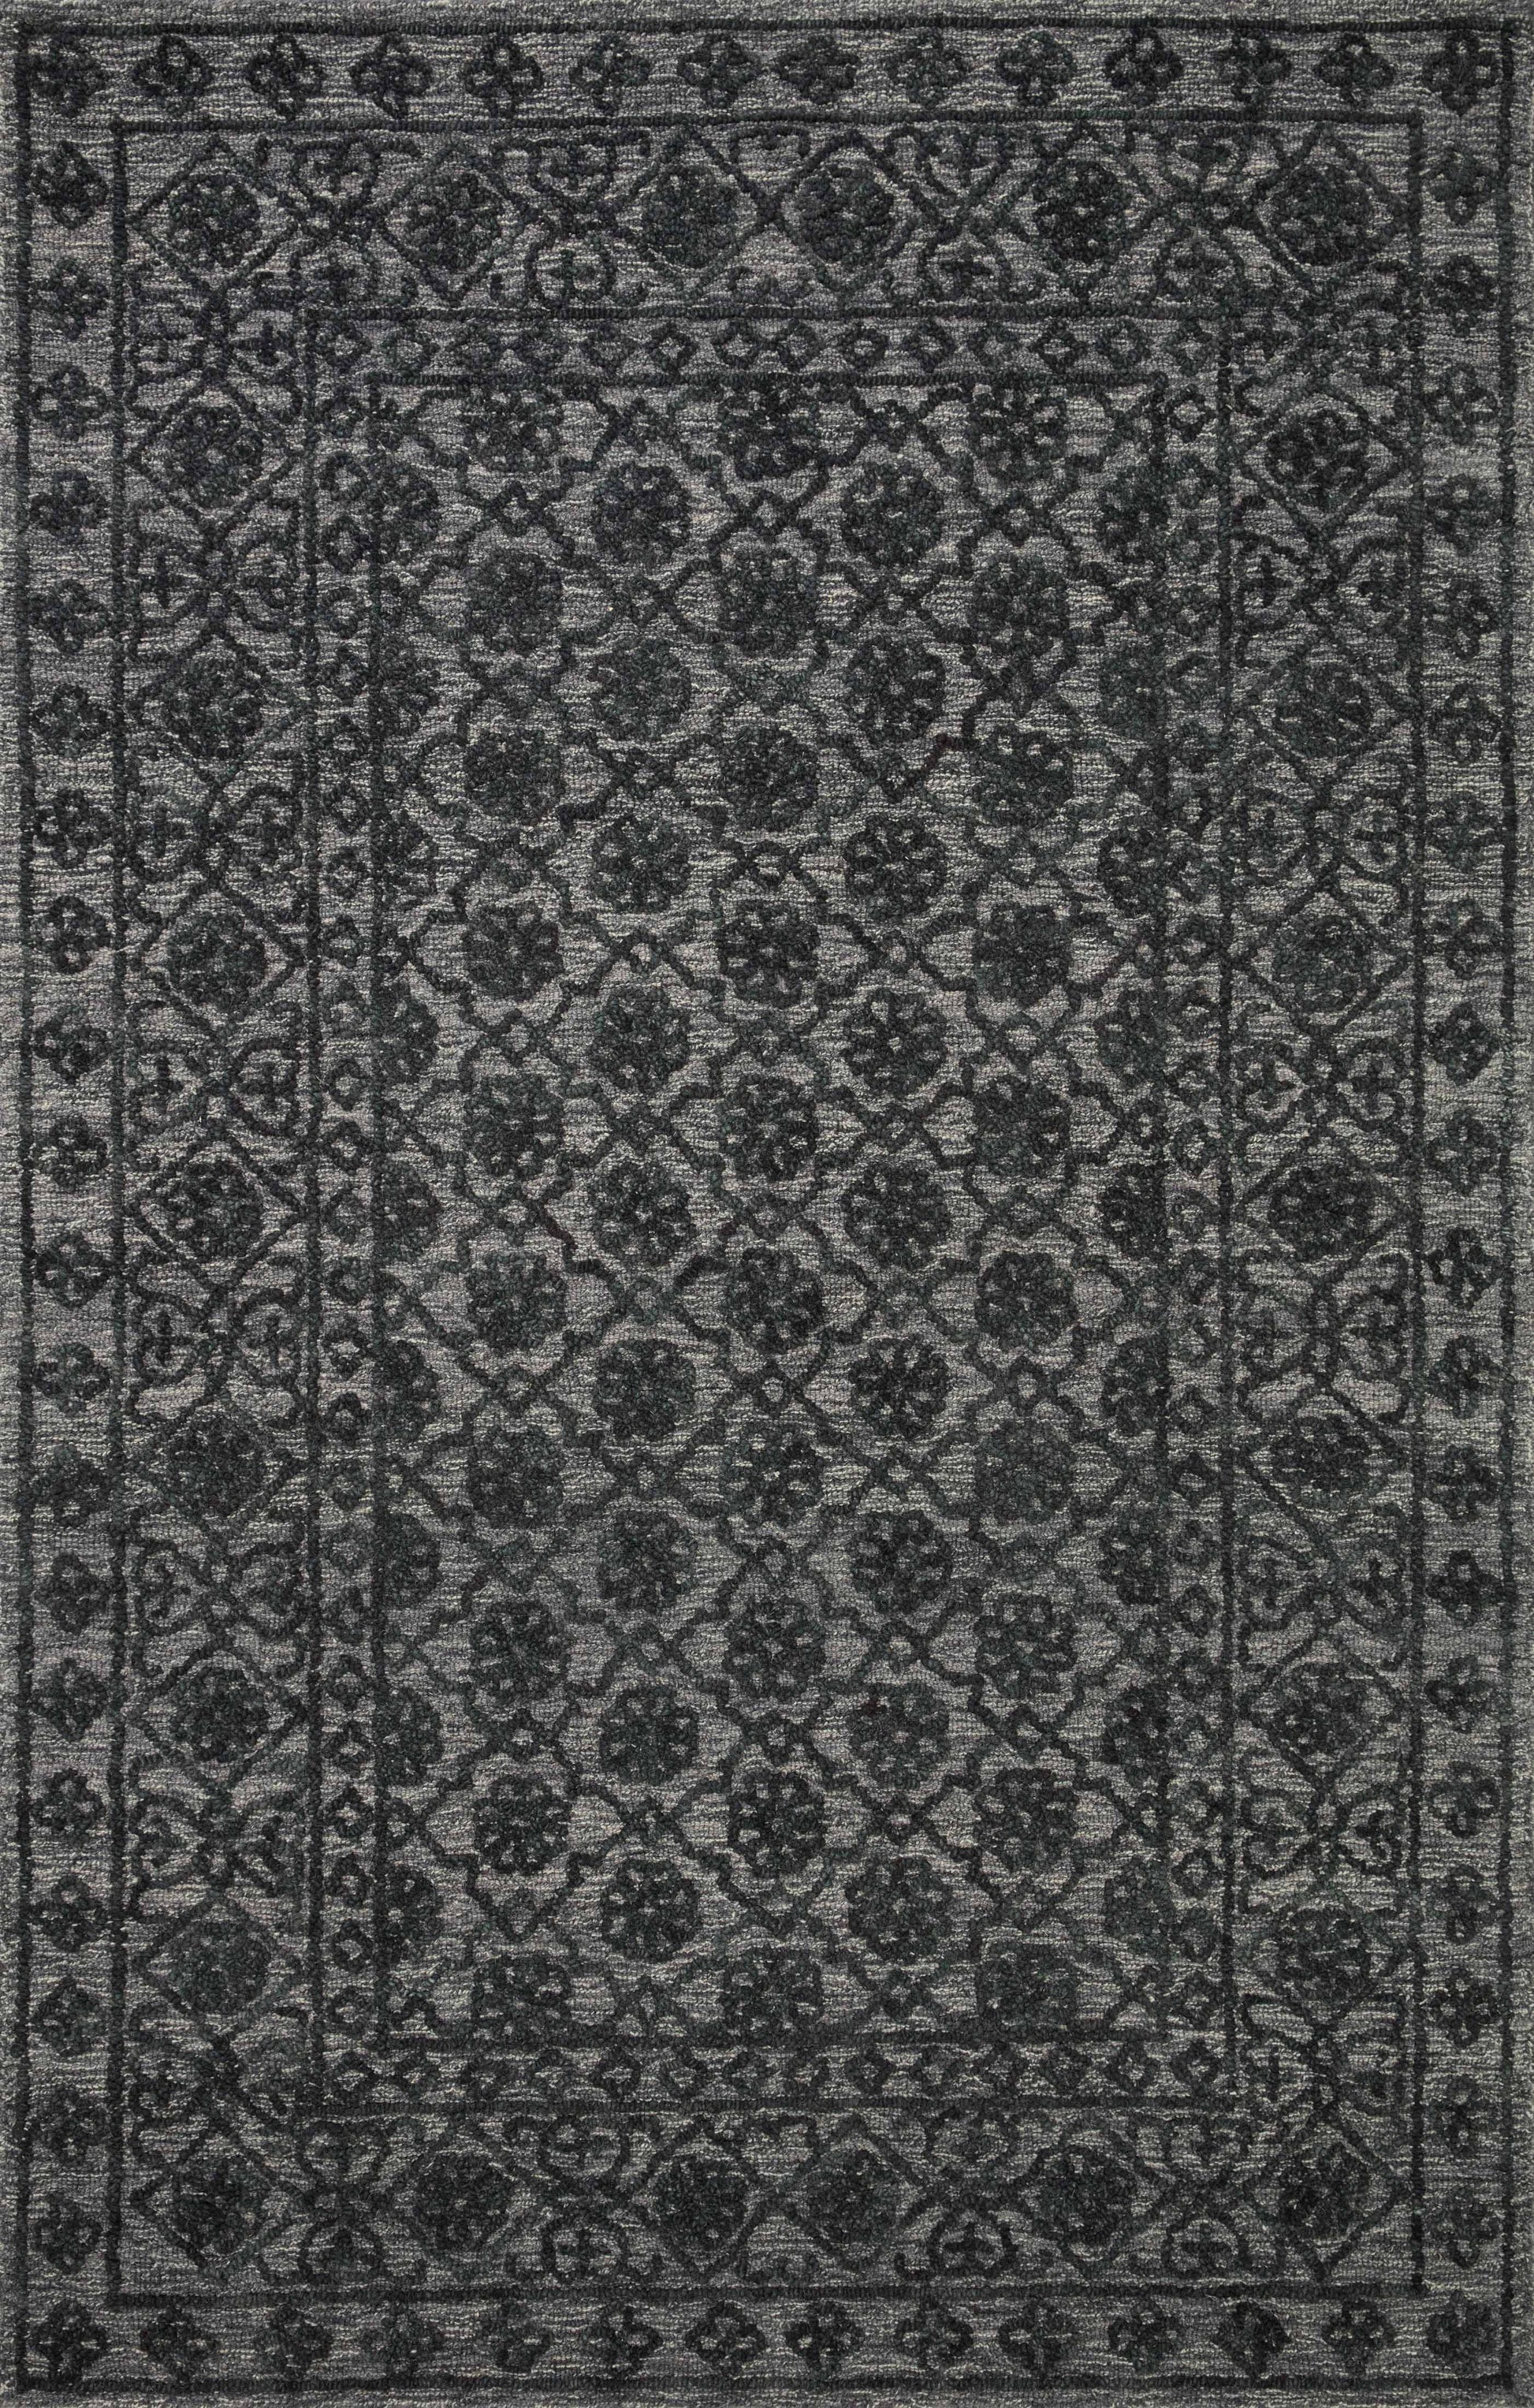 A picture of Loloi's Cecelia rug, in style CEC-01, color Smoke / Dk. Grey